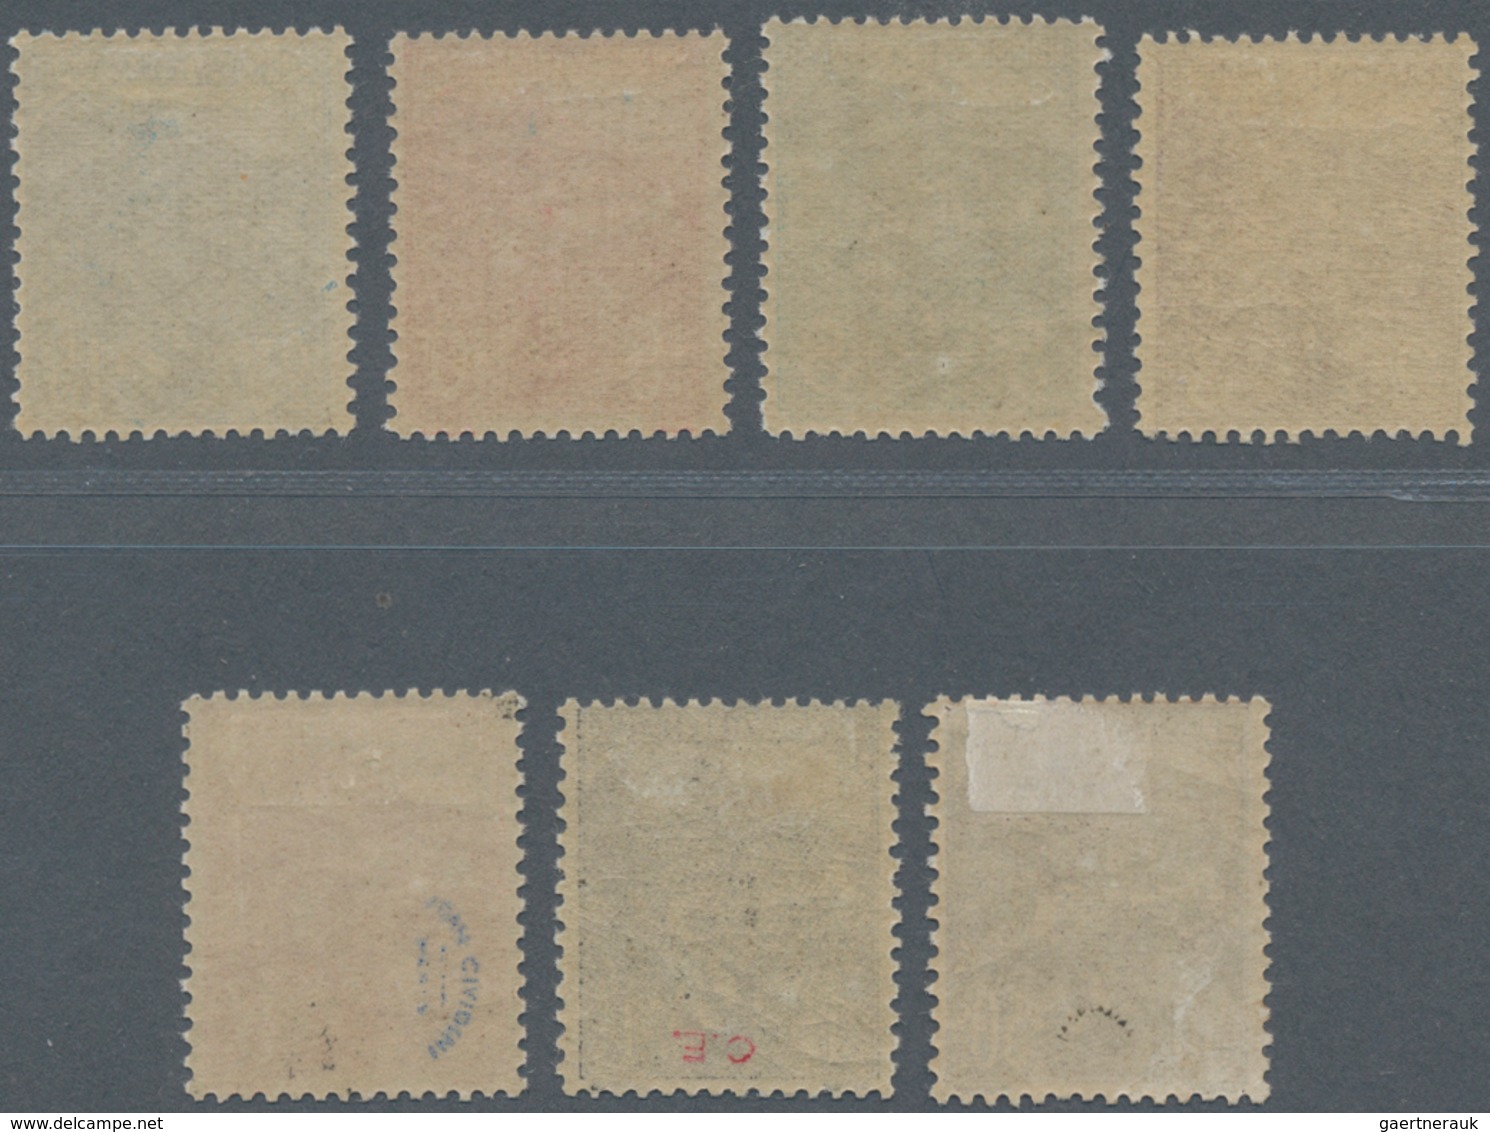 Monaco: 1919, War Orphans, 2c.+3c.-5fr.+5fr., Complete Set Of Seven Values, Fresh Colours, Well Perf - Unused Stamps